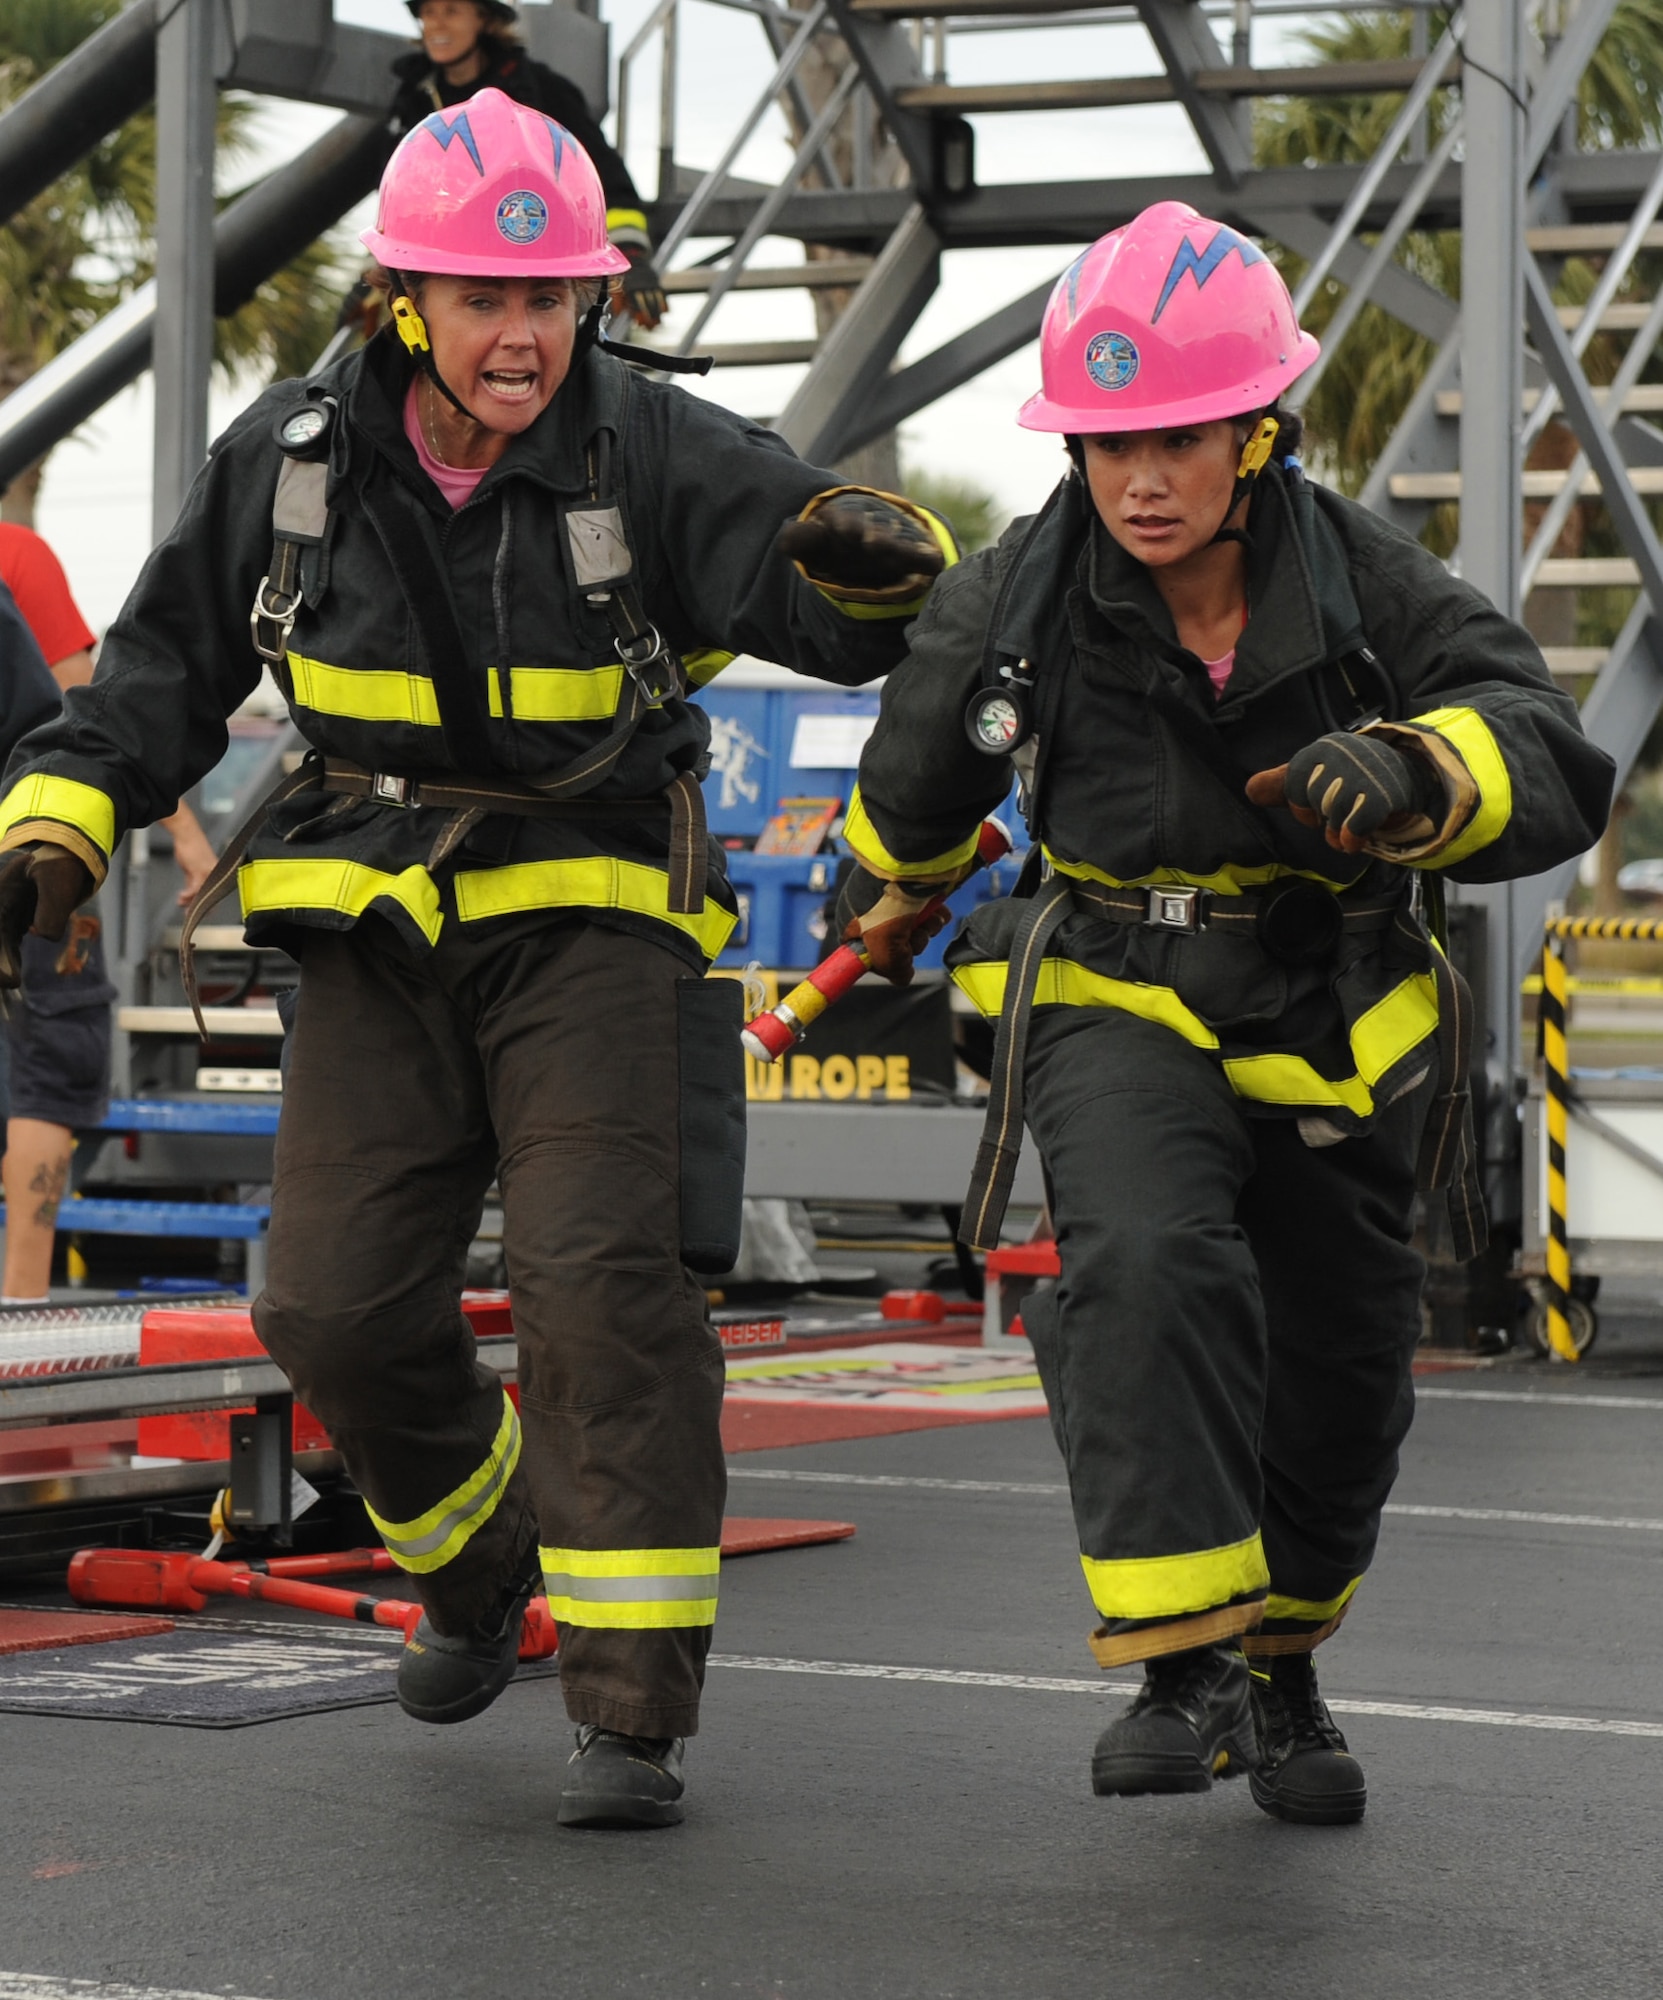 What You Wear Under Your Turnout Gear Matters - Fire Engineering:  Firefighter Training and Fire Service News, Rescue